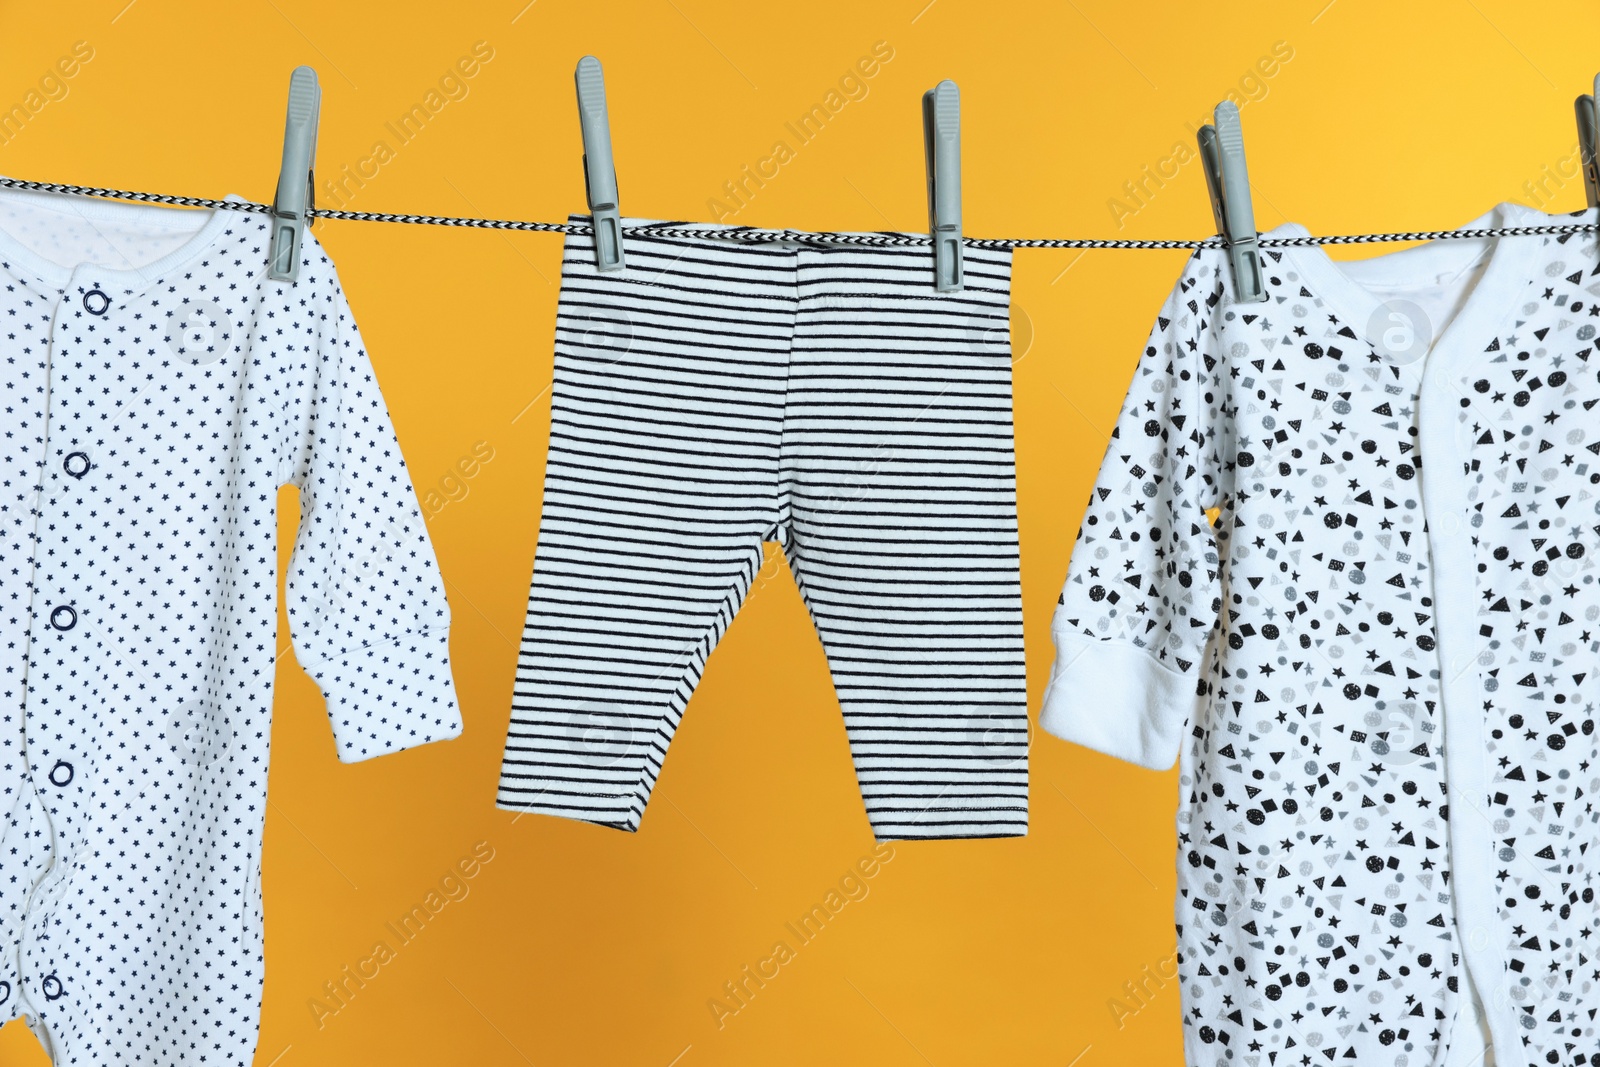 Photo of Different baby clothes drying on laundry line against orange background, closeup